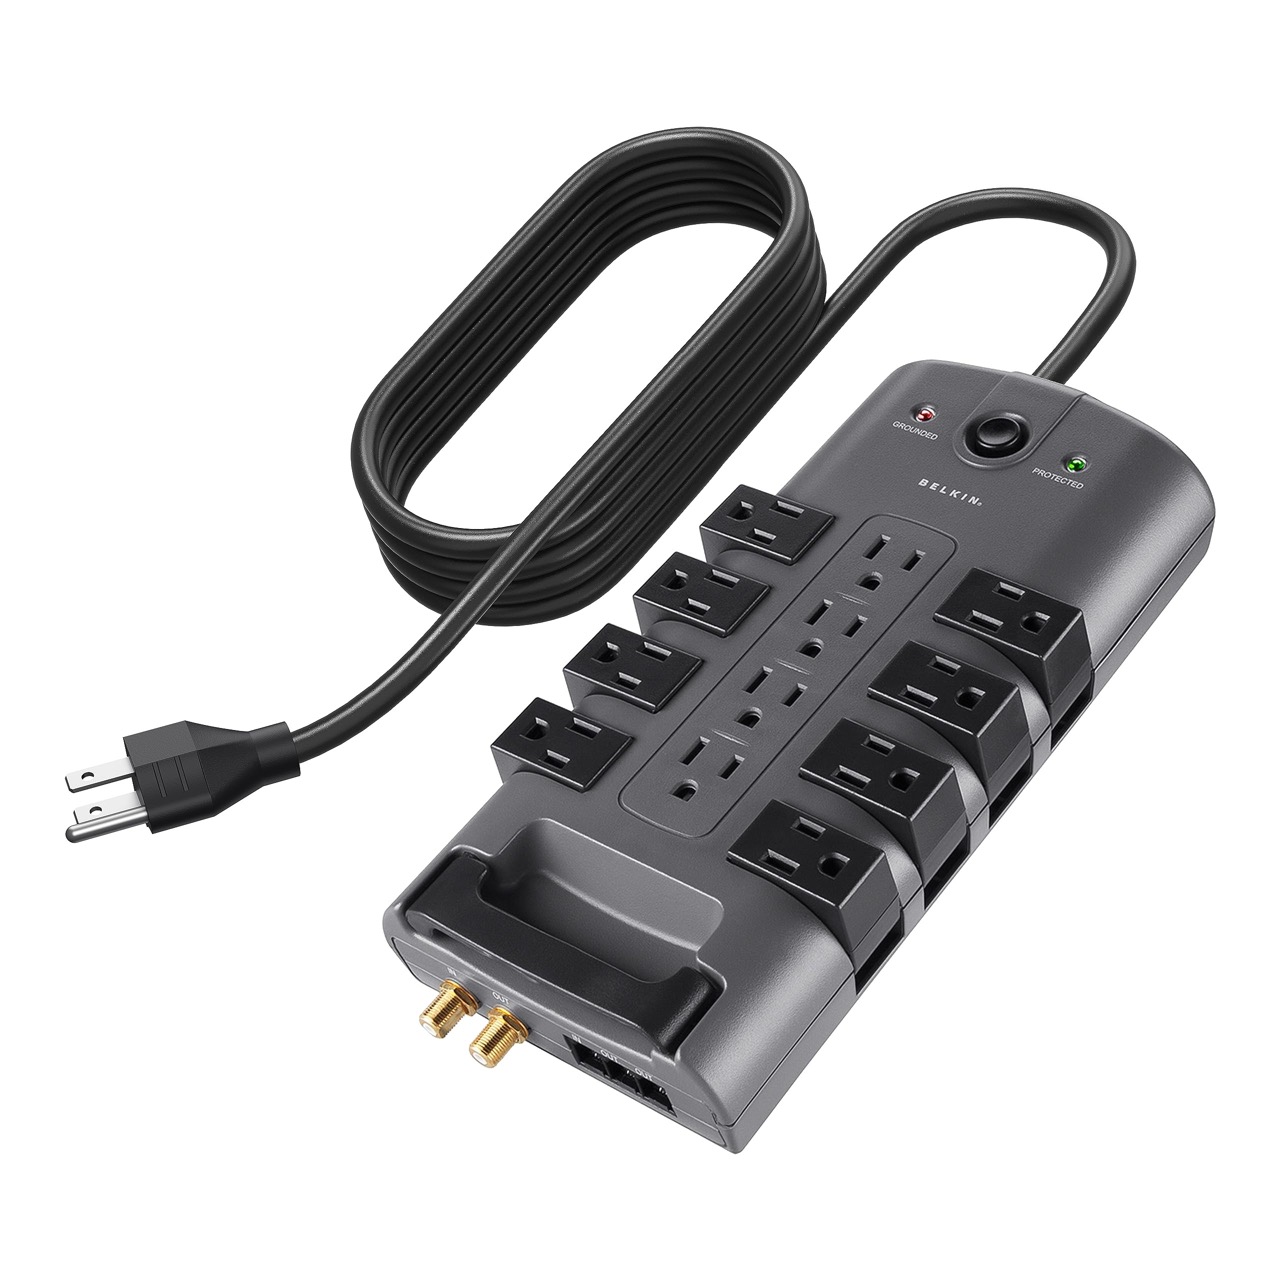 13 Best Pivot Surge Protector for 2023